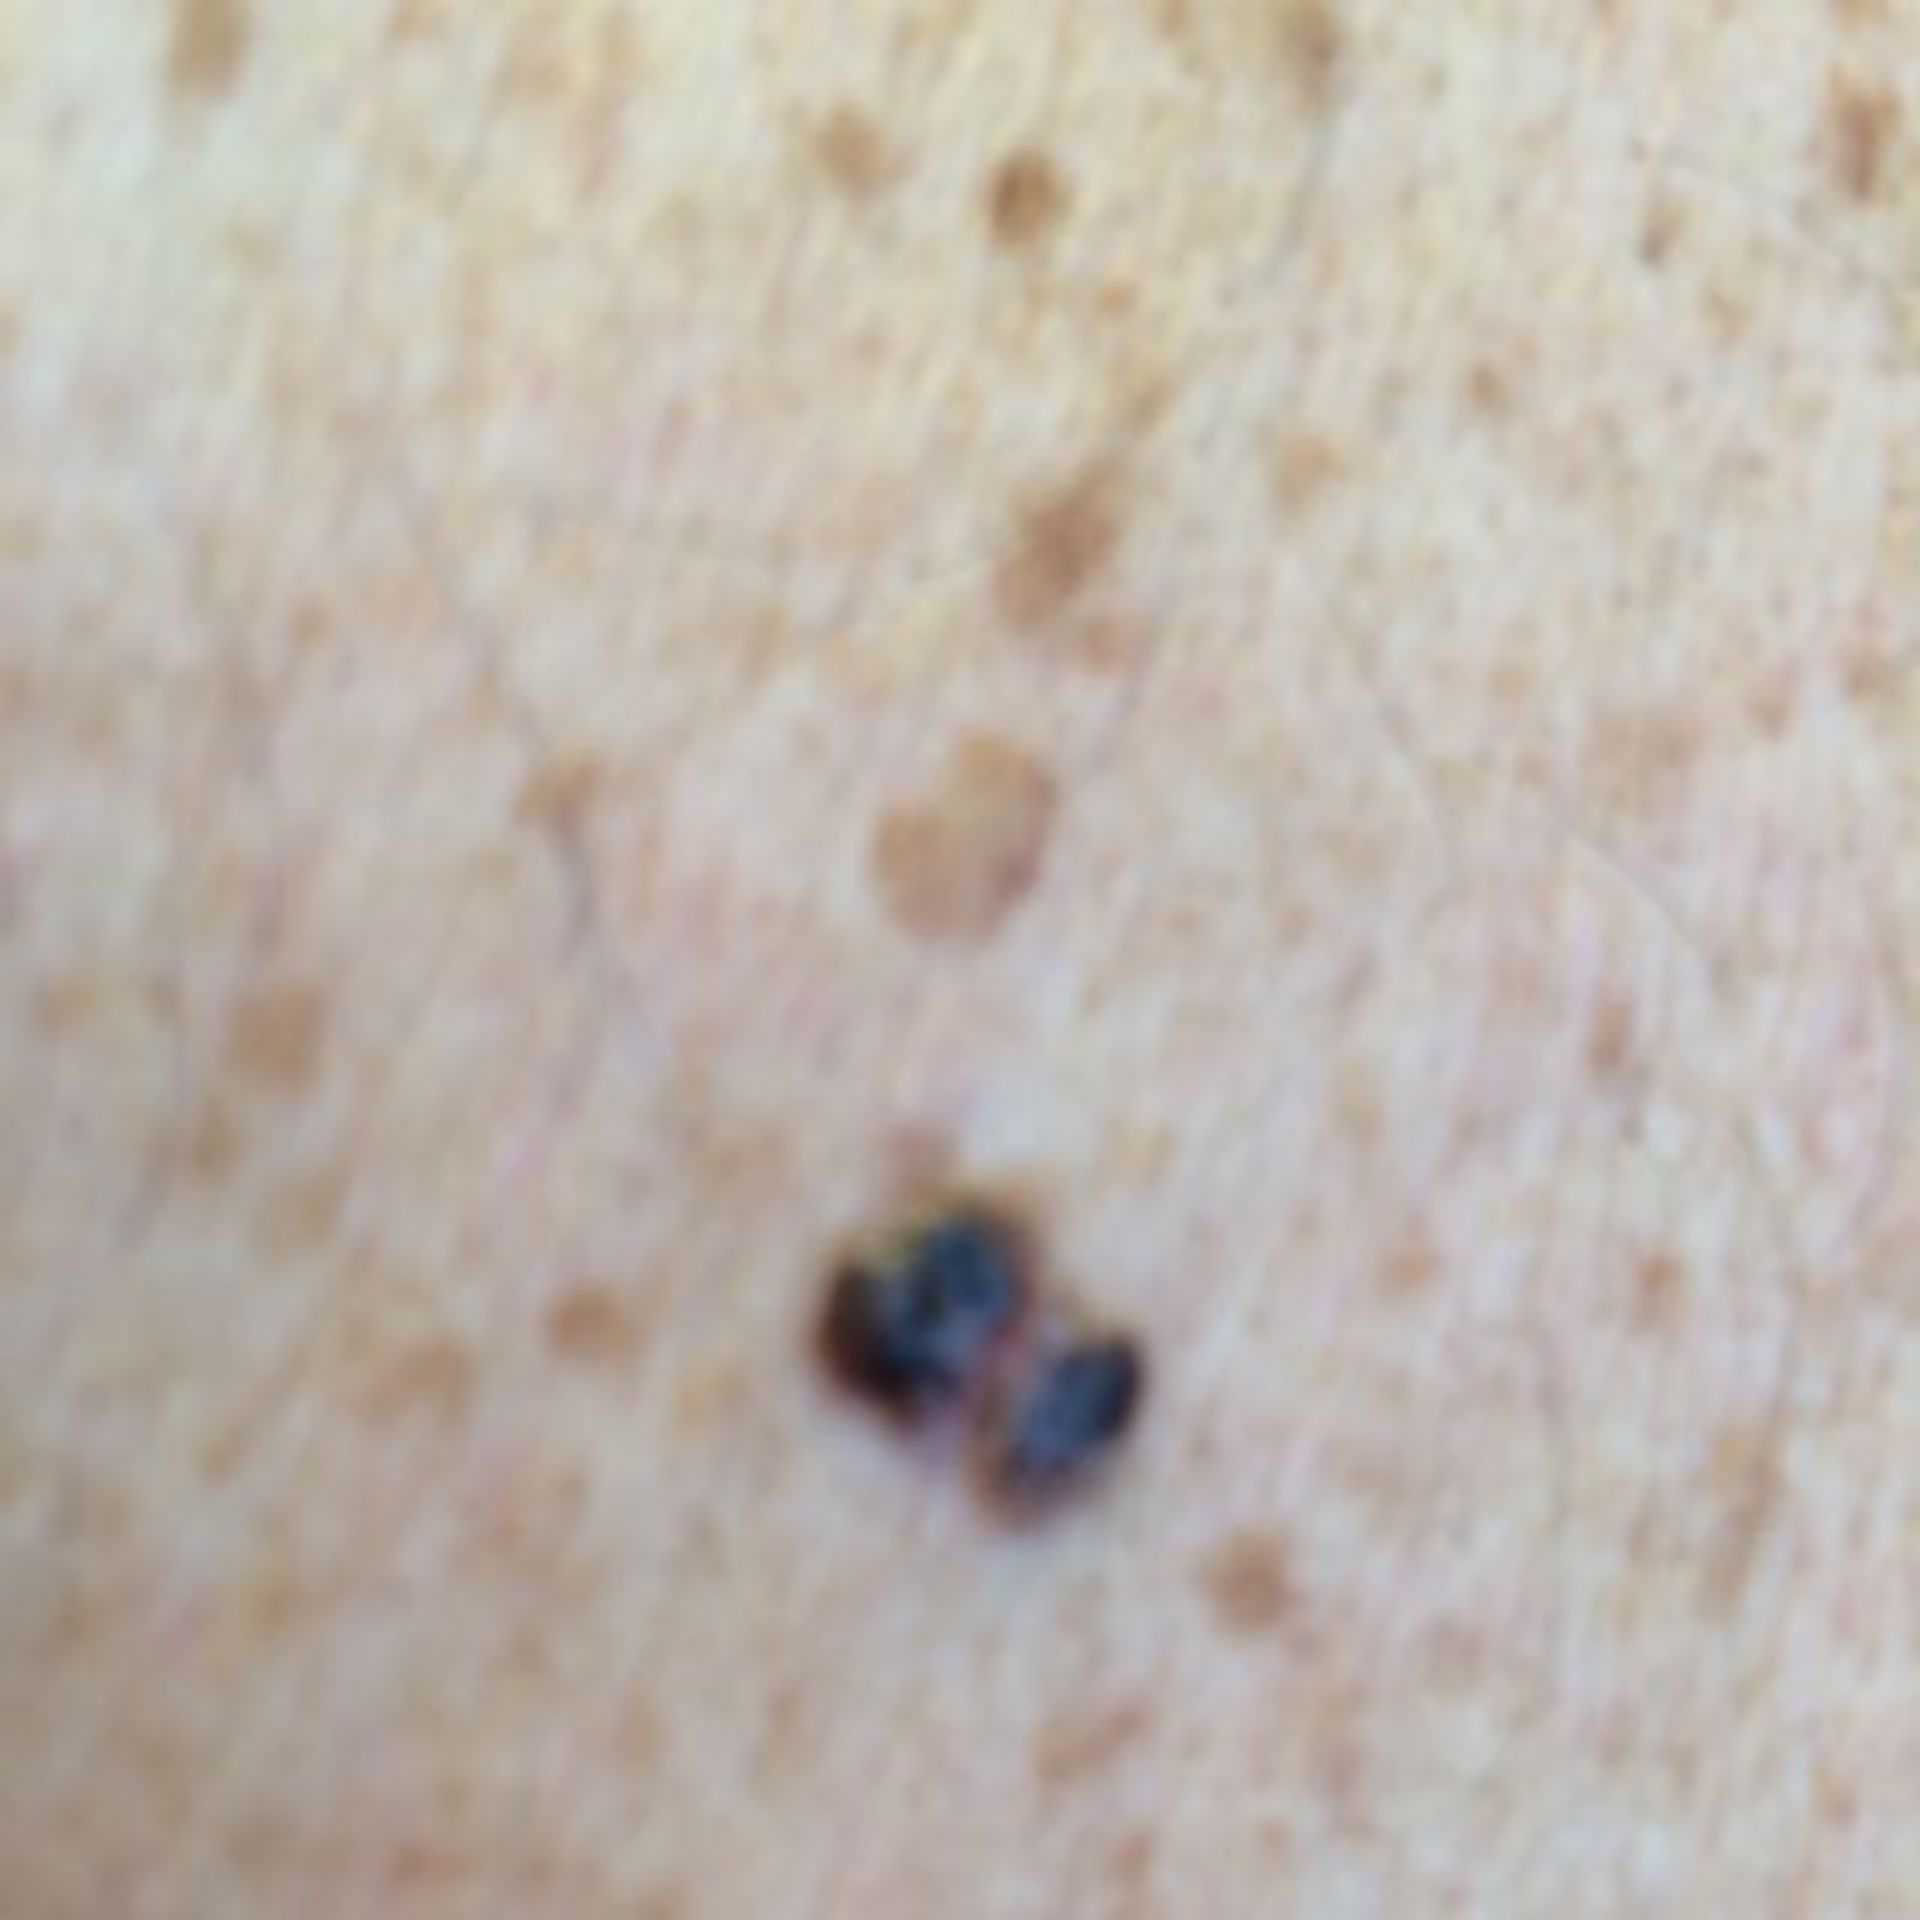 Seborrhoeic keratosis, close-up with iPhone 5s without flash